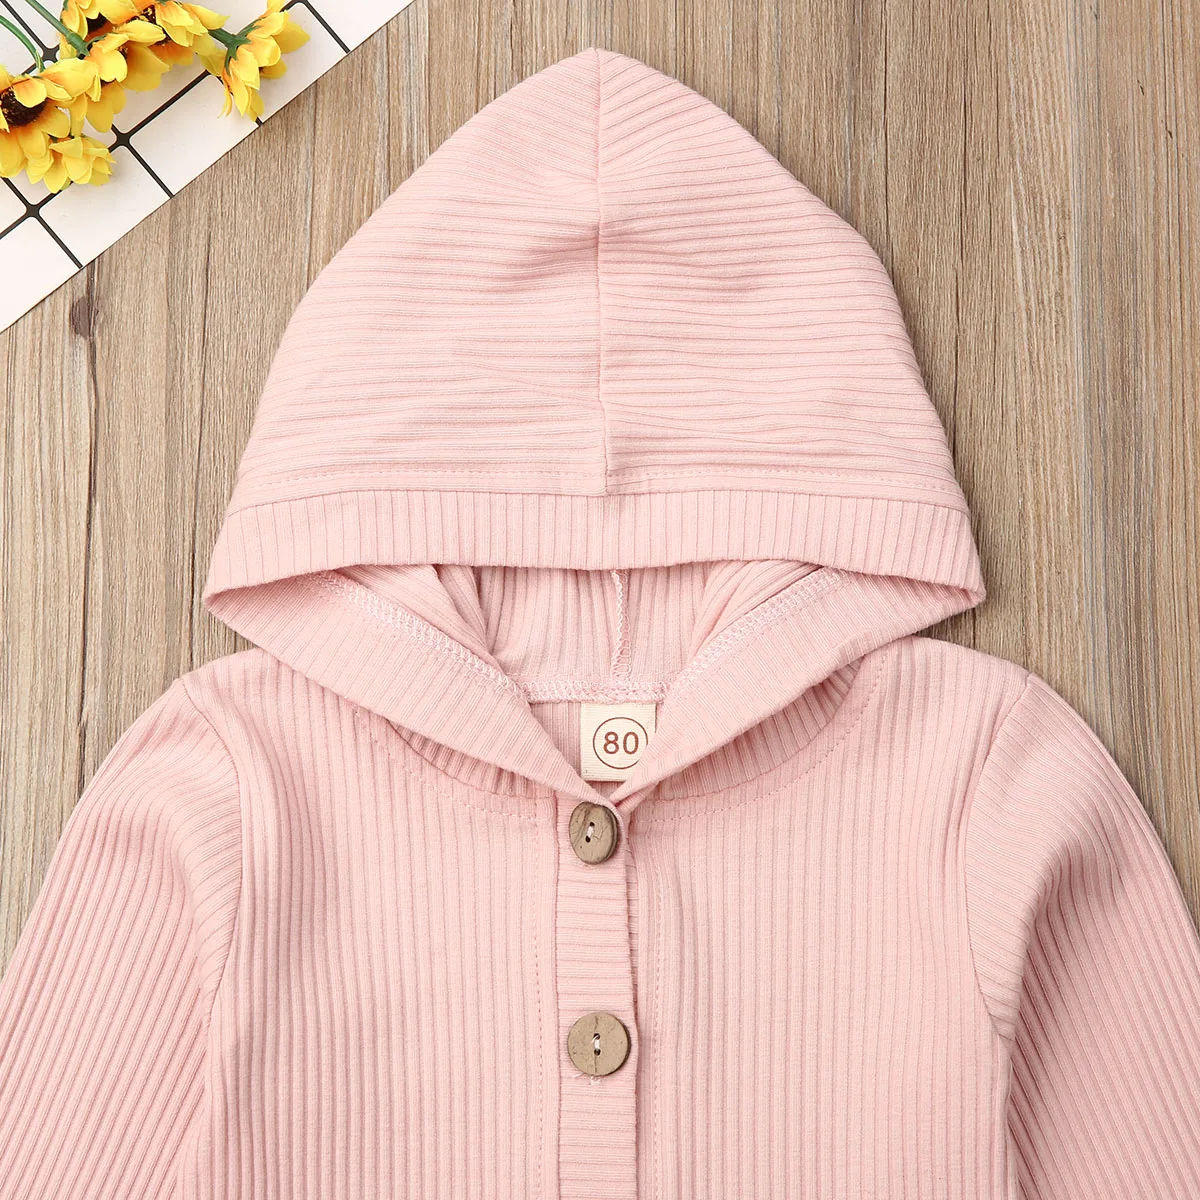 Baby Sweaters Autumn Infant Baby Girl Clothes Long Sleeve Knitted Coat Jacket Outwear Tops